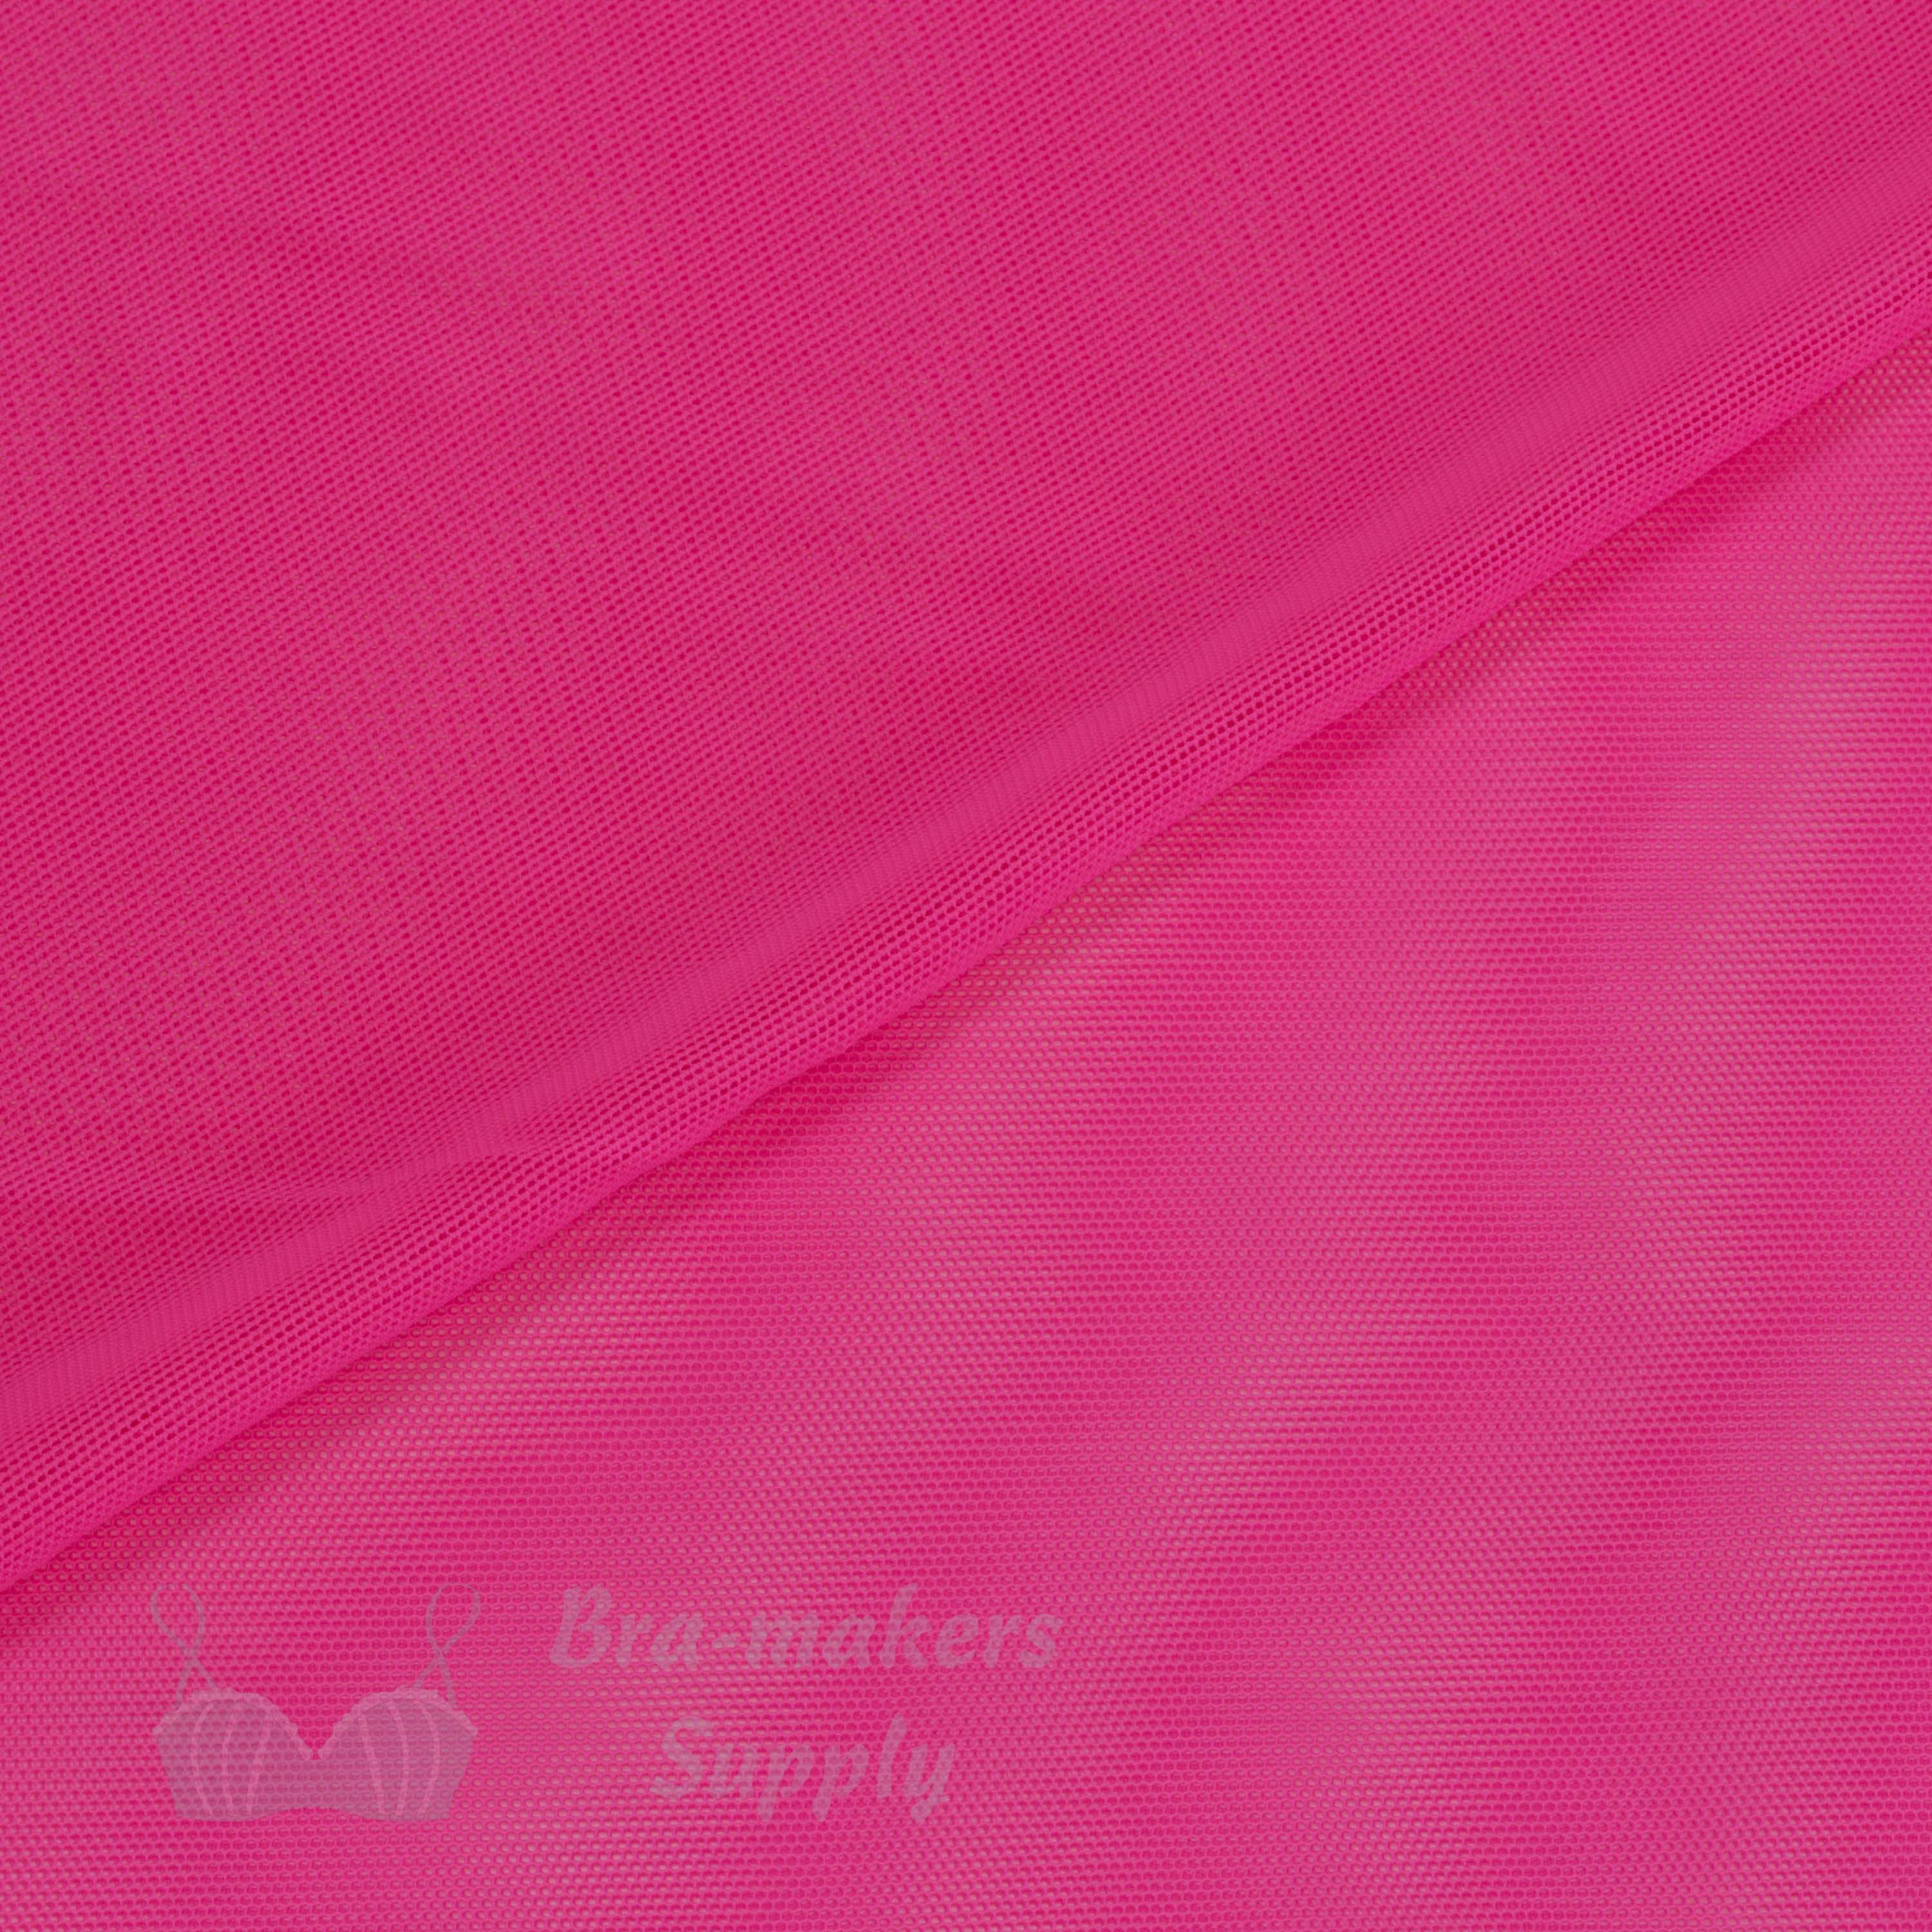 stretch mesh fabric FP-7 hot pink from Bra-Makers Supply folded shown